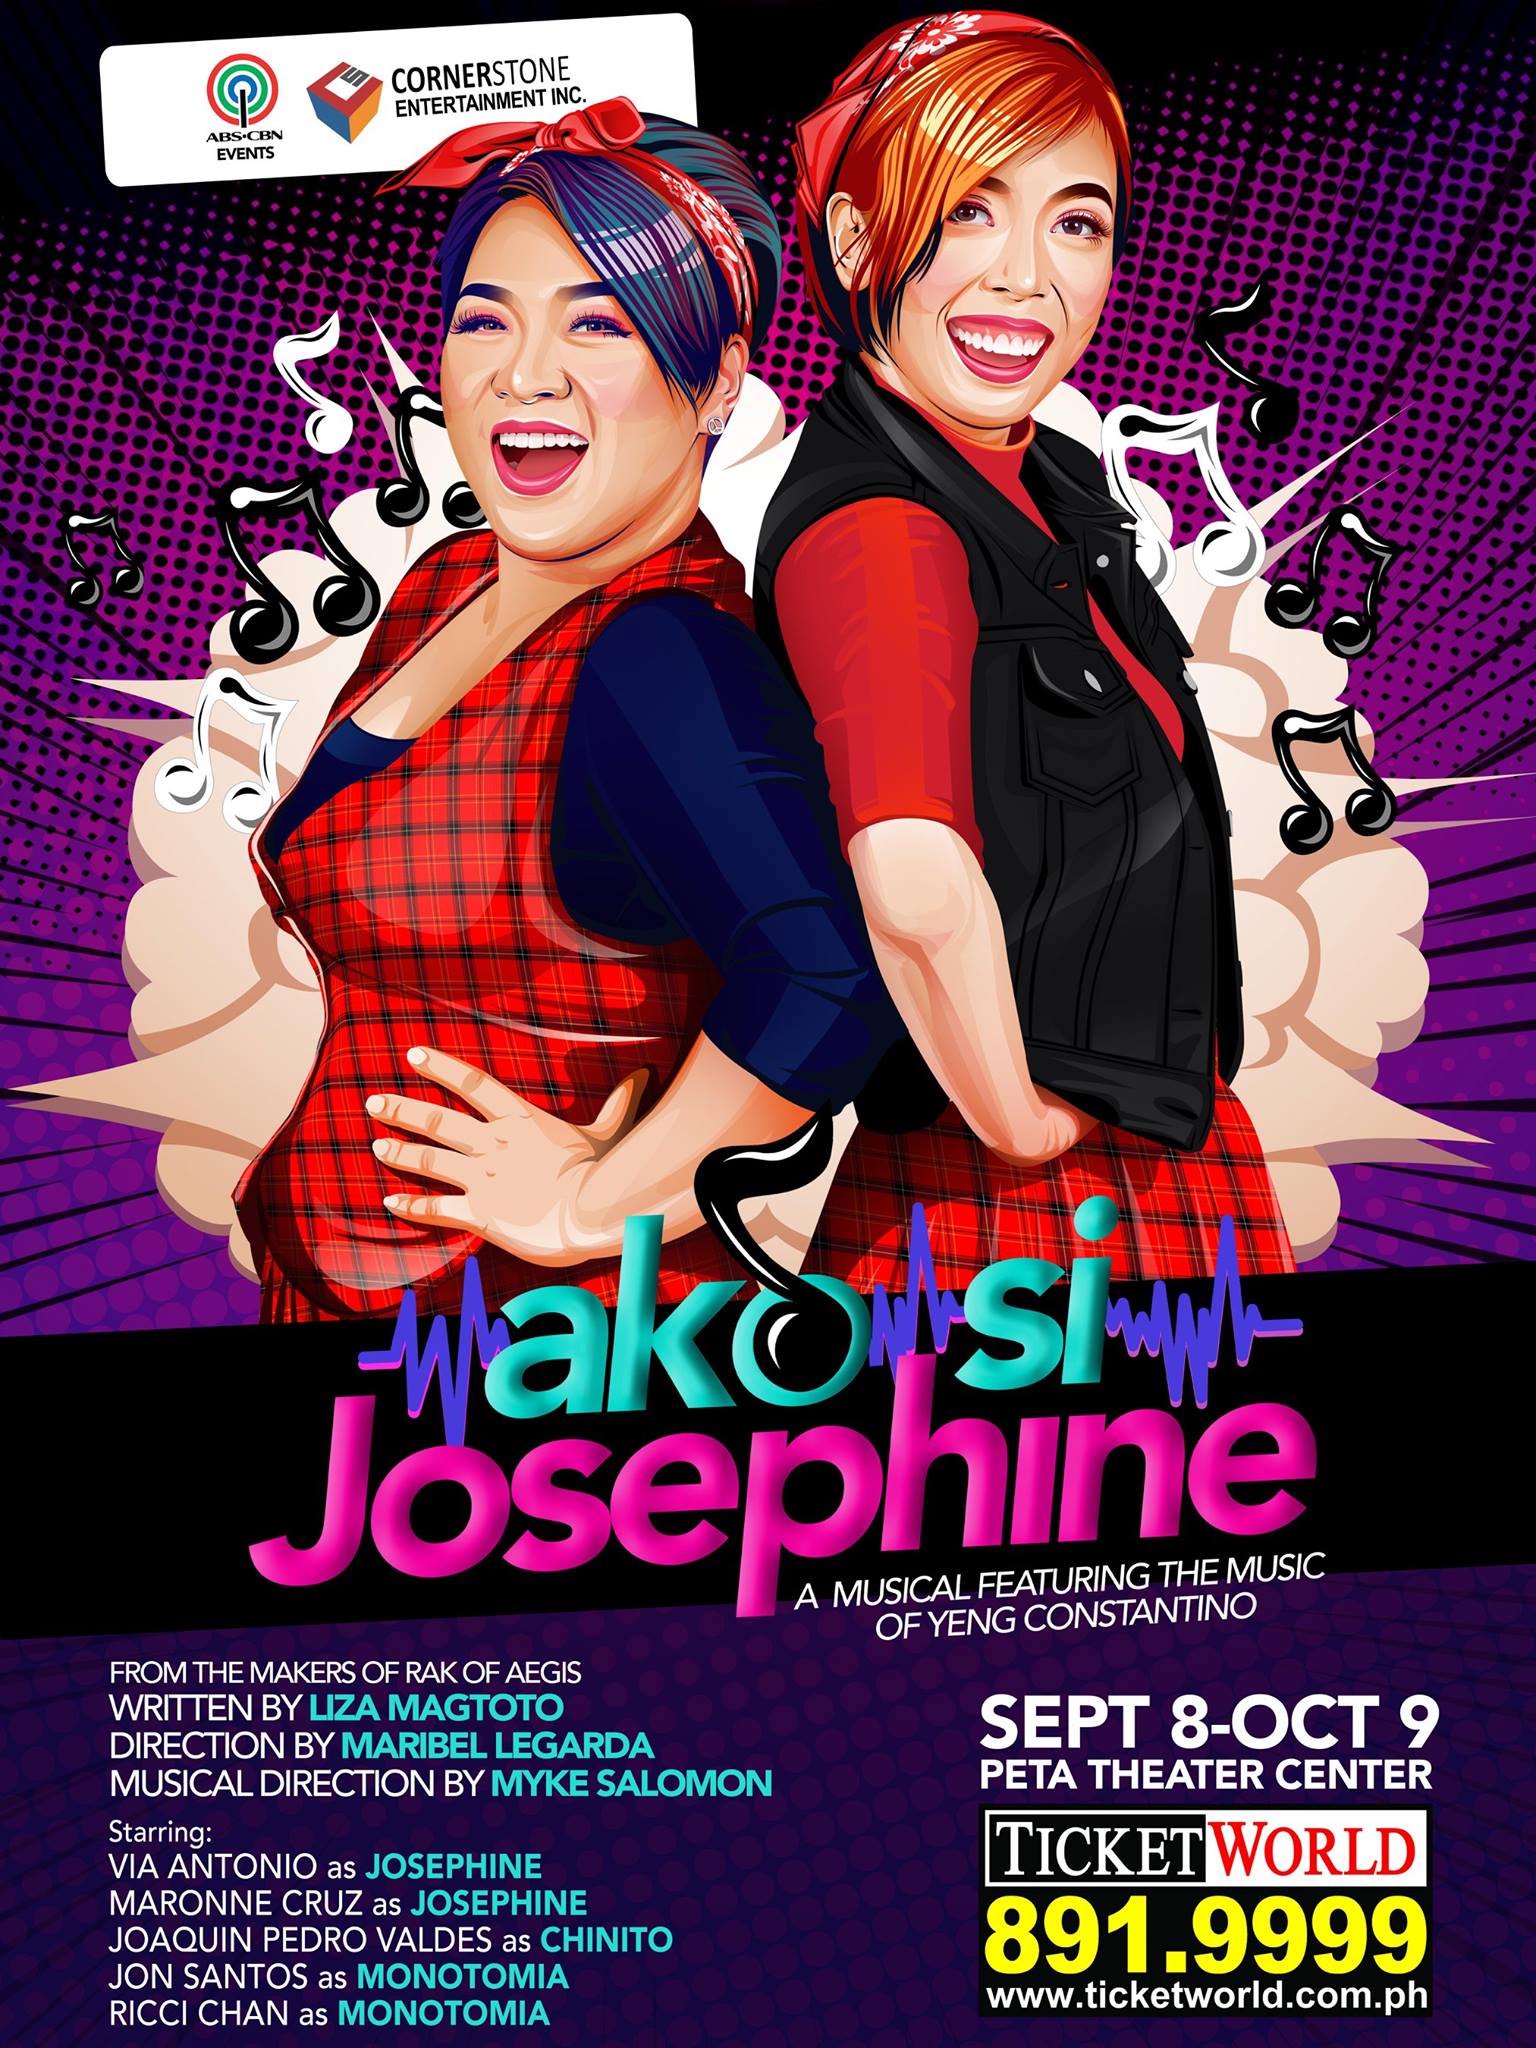 Cornerstone Entertainment Inc. Page Liked · August 31 · Edited · Can you live in a world where love songs are FORBIDDEN? Ladies and gents, Karaoke-loving Filipinos of the world! Here comes a musical that'll make you feel all the love song feels! AKO SI JOSEPHINE, a musical featuring the songs of Yeng Constantino! Produced by ABS CBN and Cornerstone, with the same illustrious talents who brought you RAK OF AEGIS, you can definitely count on romance and comedy and impeccable singing from start to end. Ako Si Josephine will run from Sept 8 to Oct 9 at the PETA Theater! Book your tickets now via Ticketworld or visit: Ako Si Josephine page for more info. On the poster: "Josephine" Via Antonio & Maronne Cruz — with Pauline Gatdula.